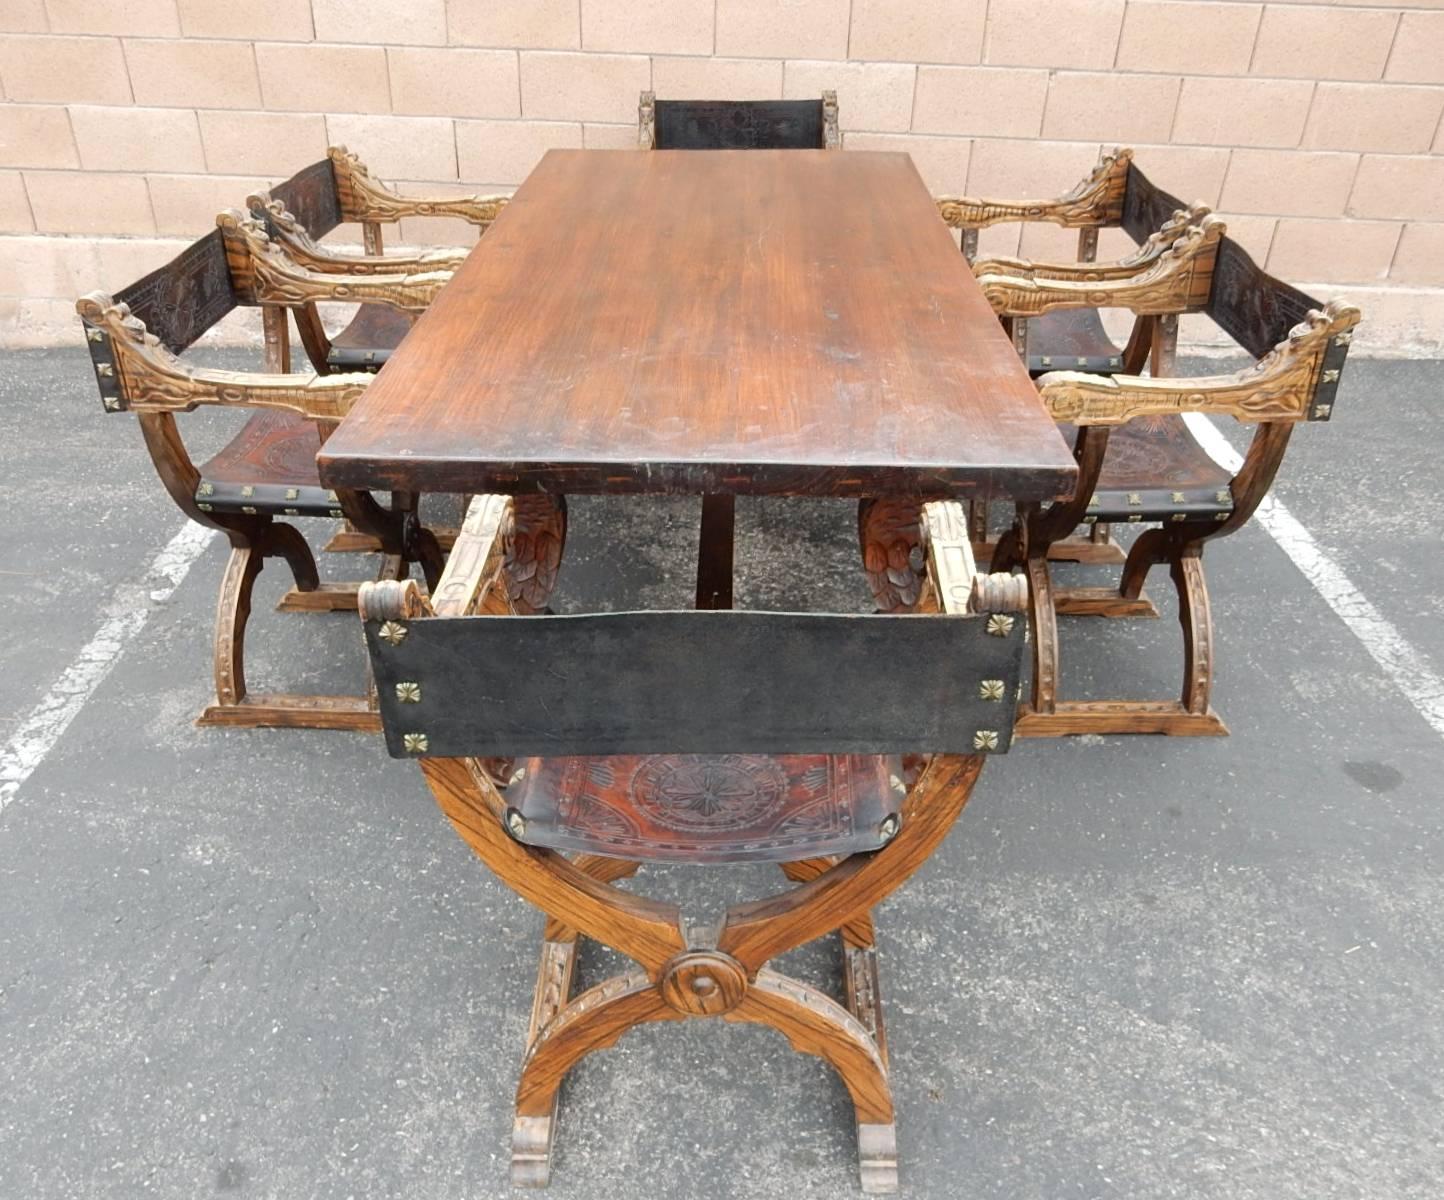 Spanish Colonial Dining Table with Six Elaborate Carved Wood and Leather Chairs 1